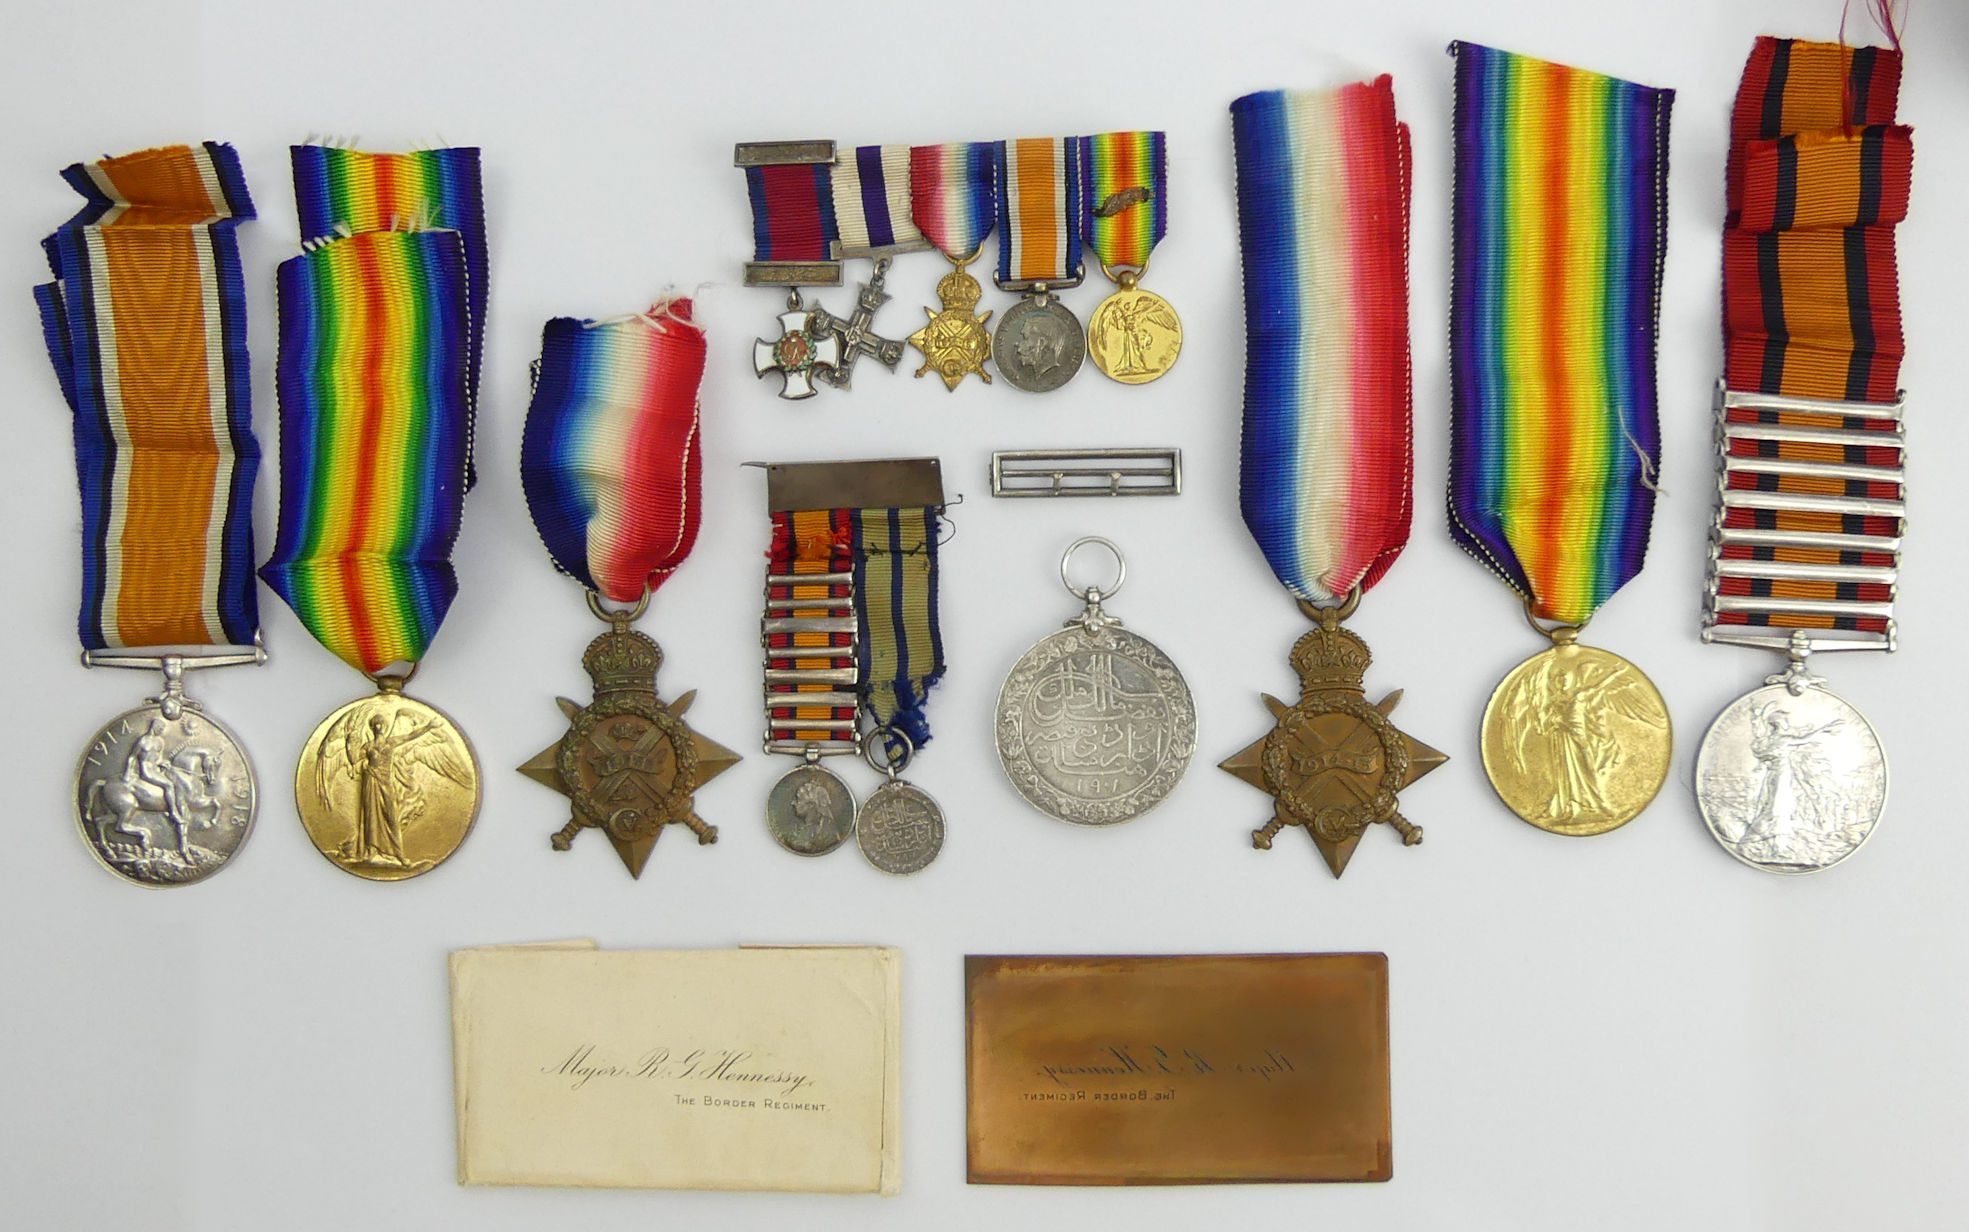 A family of medals starting with The South Africa Campaign to Major J. P. C. Hennessy I. S. C.